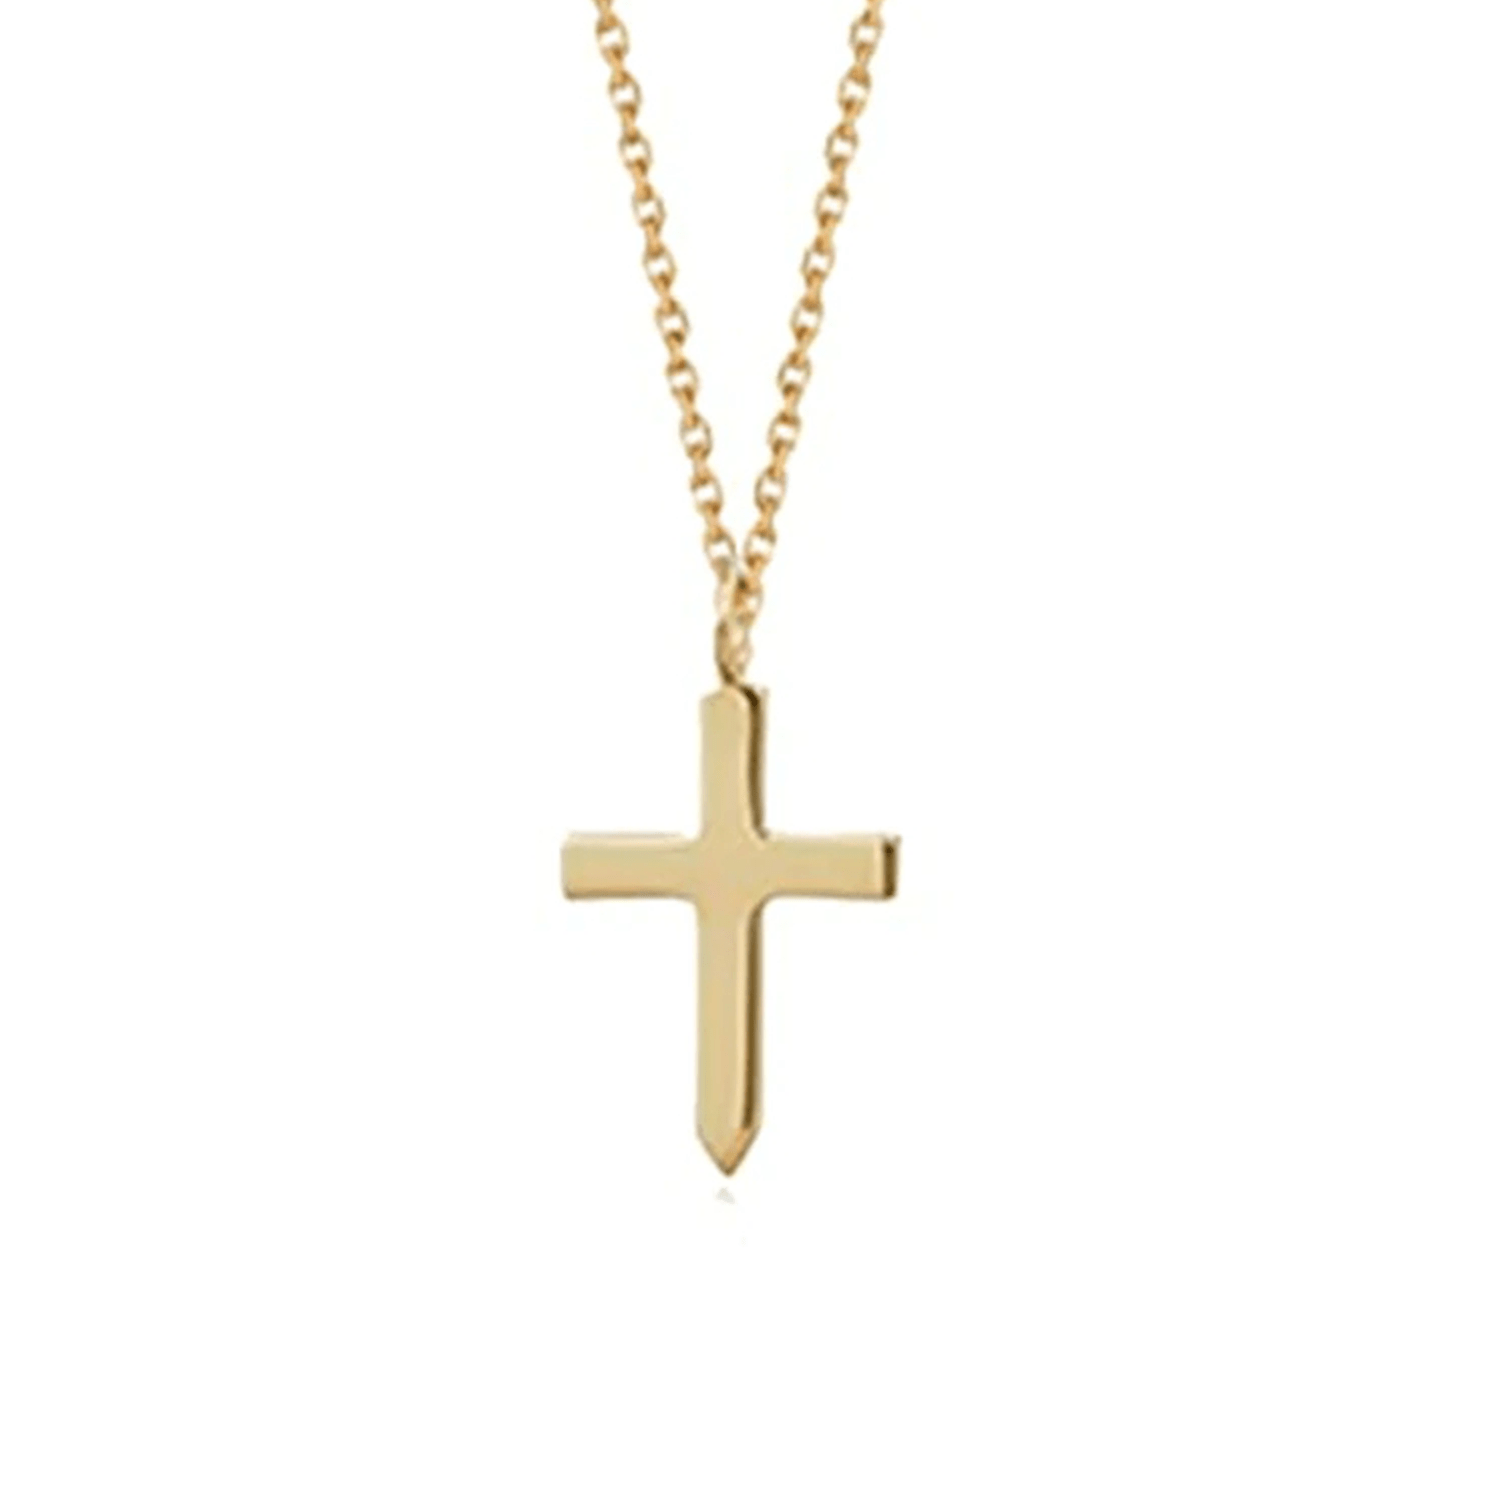 FANCIME Mignon Cross 14K Yellow Gold Necklace Main